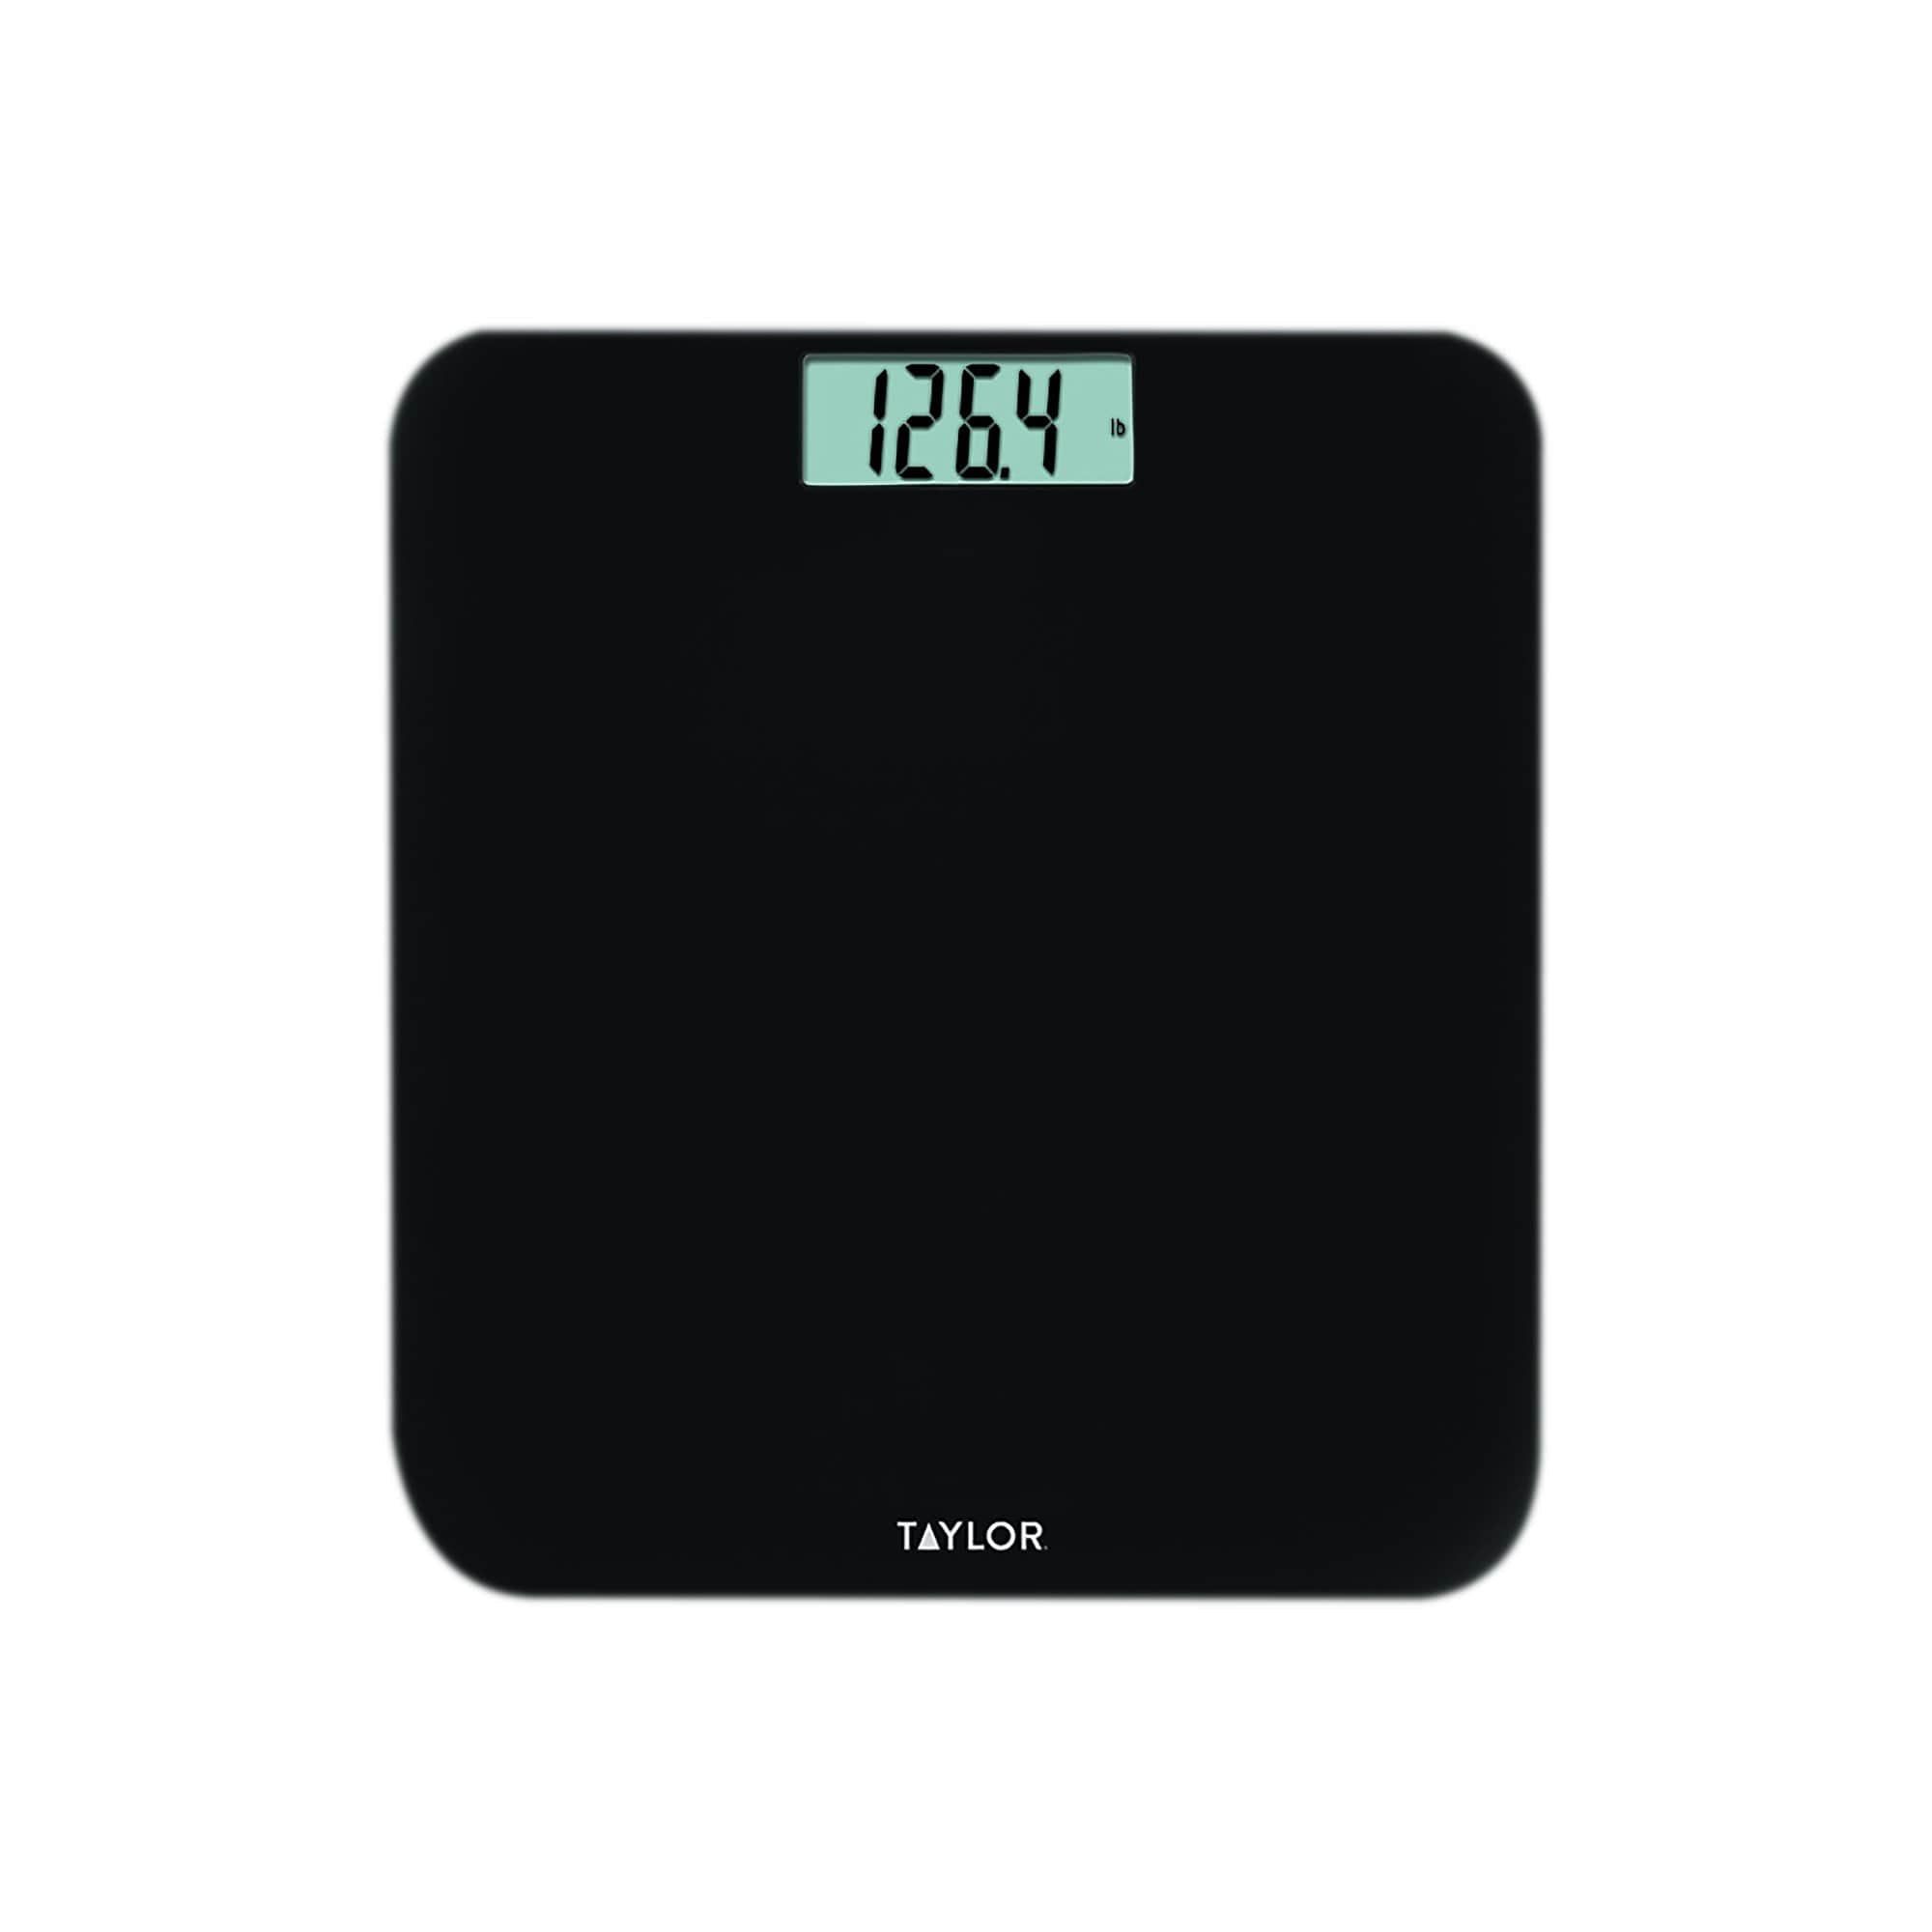  Taylor Battery Free Analog Scales for Body Weight